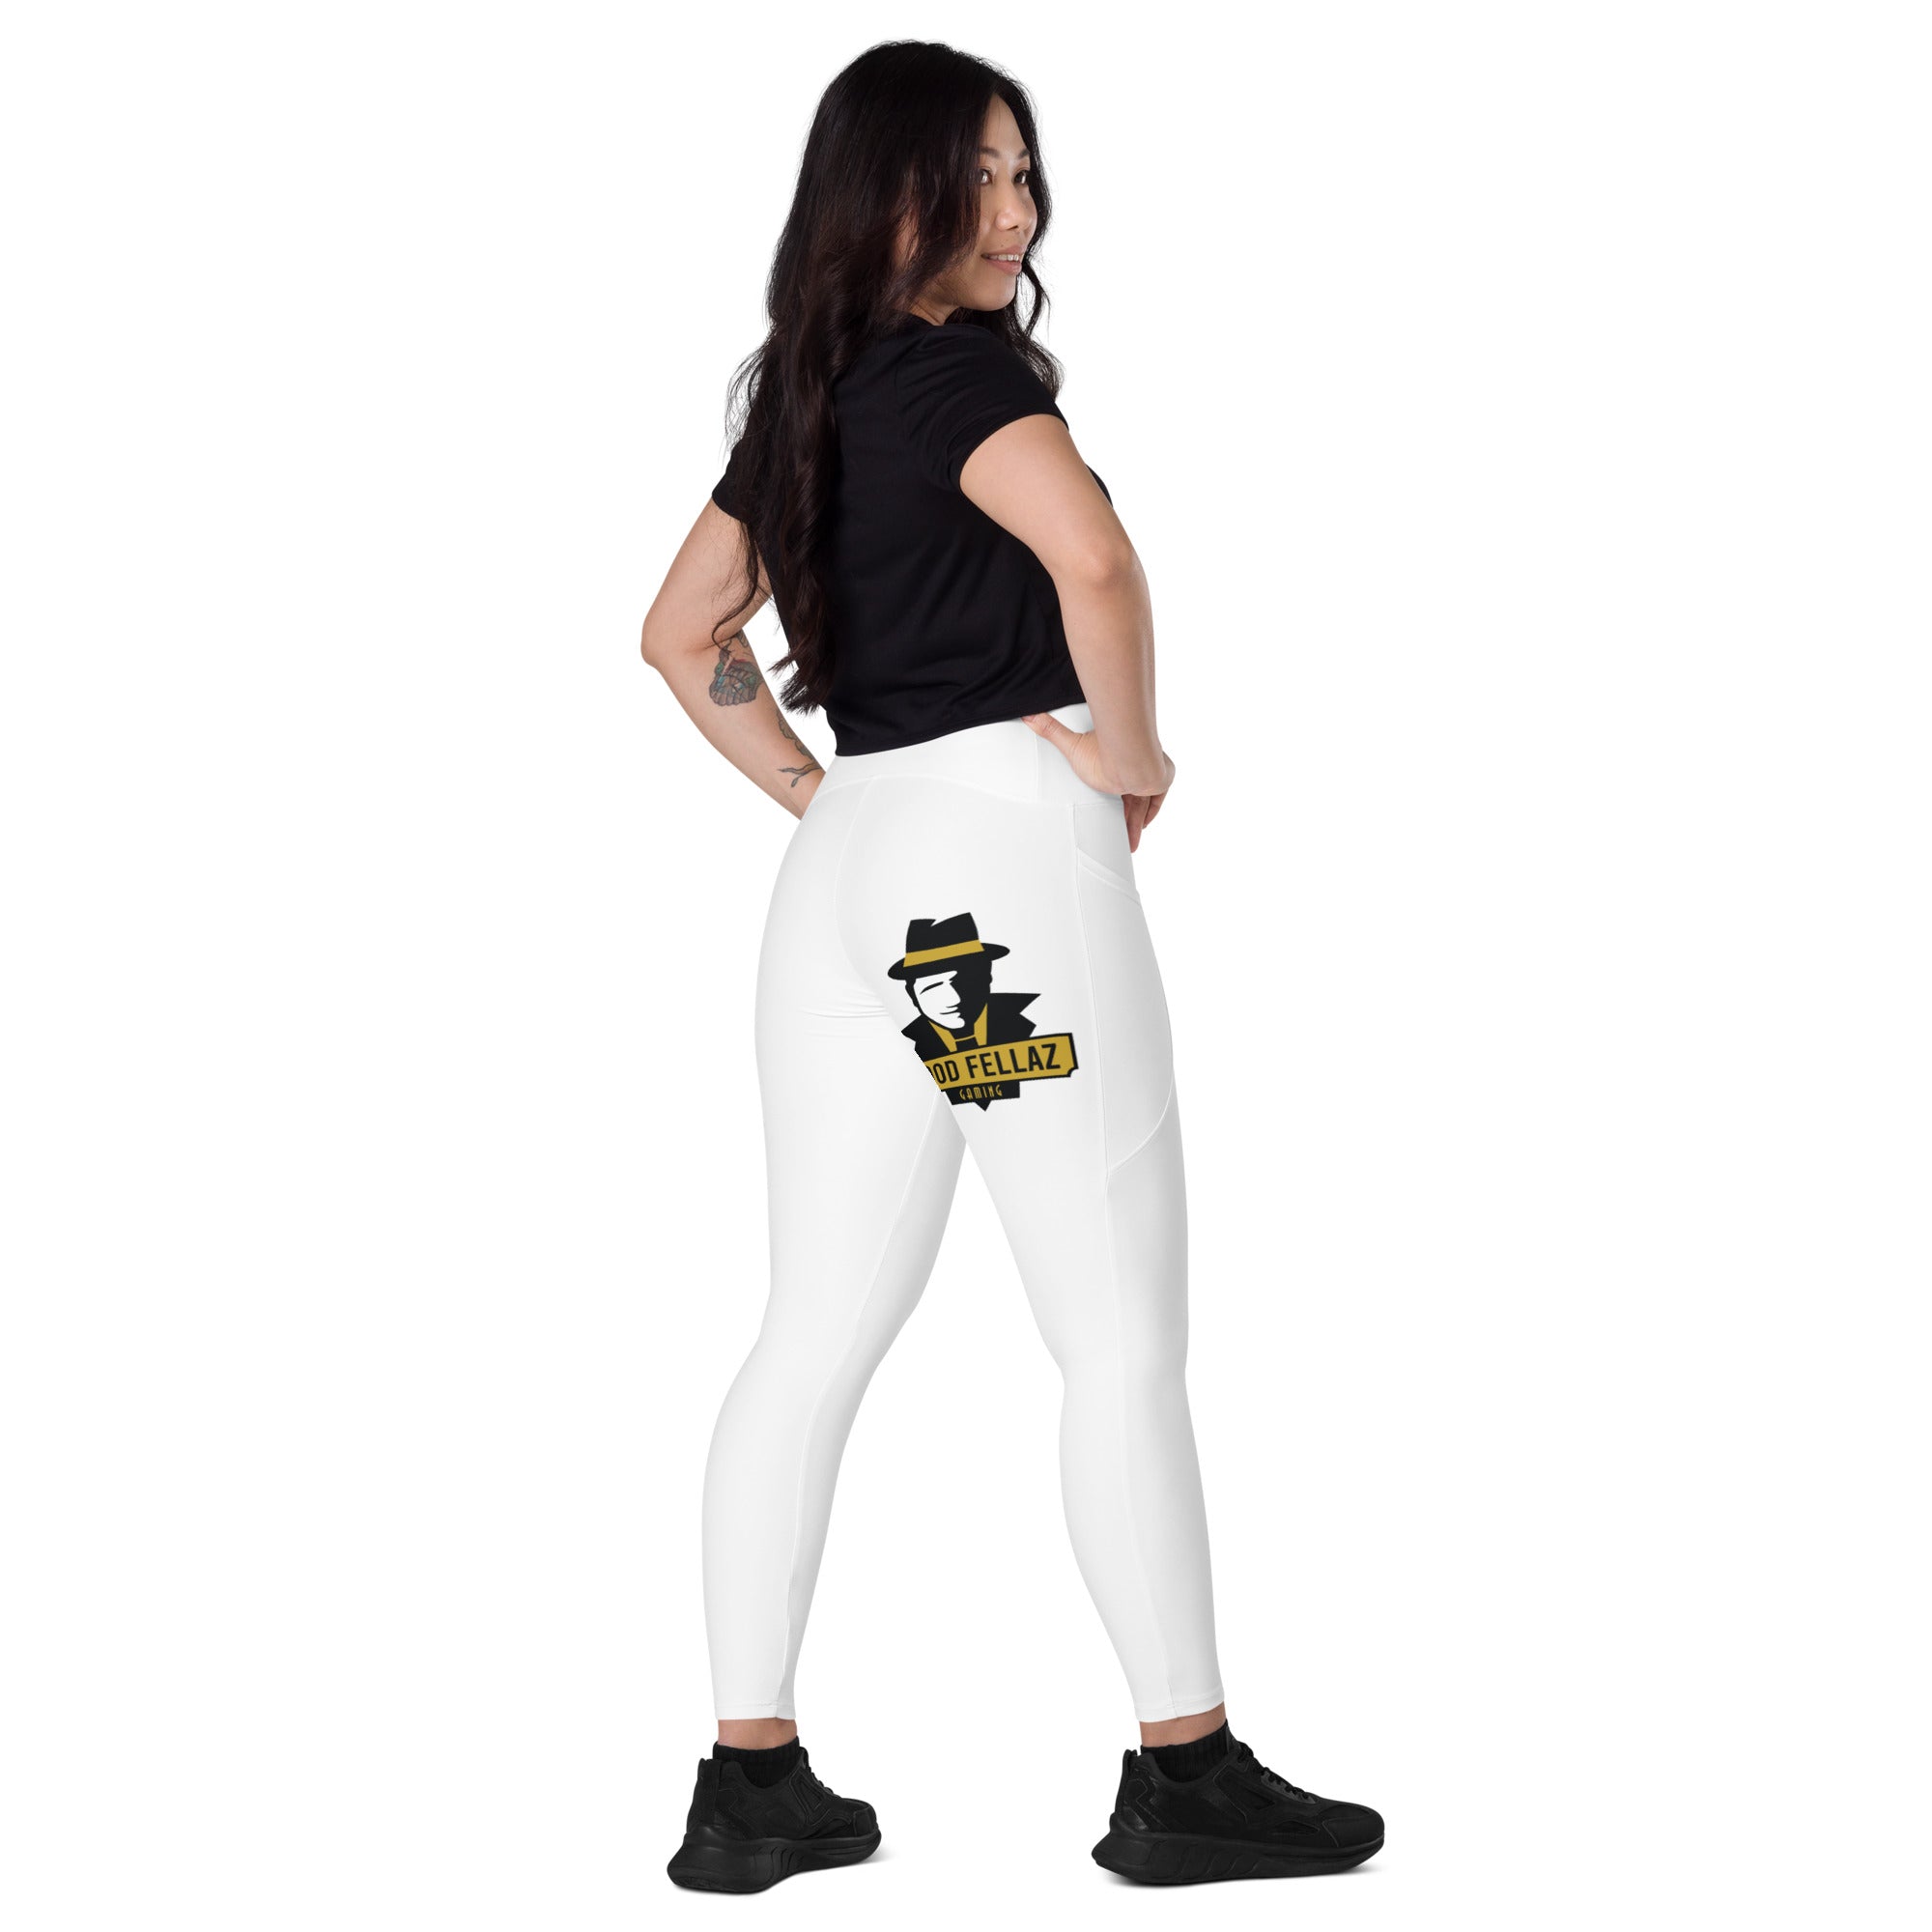 gf Crossover leggings with pockets